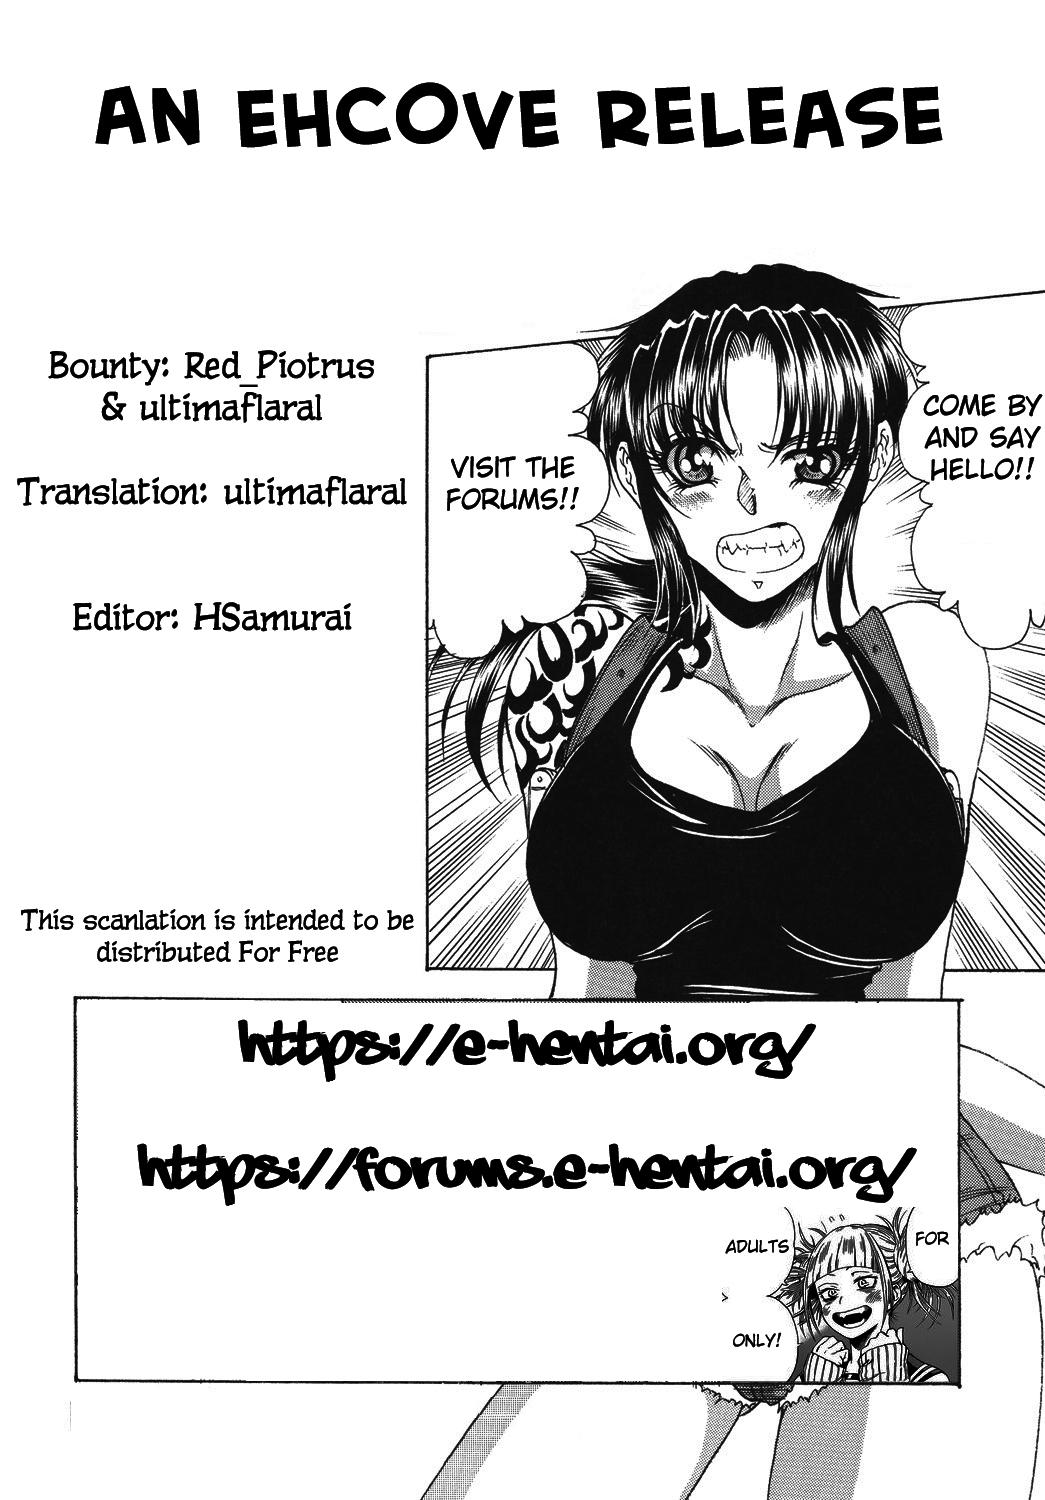 Best Blow Jobs Ever ZONE 39 From Rossia With Love - Black lagoon Beautiful - Page 35